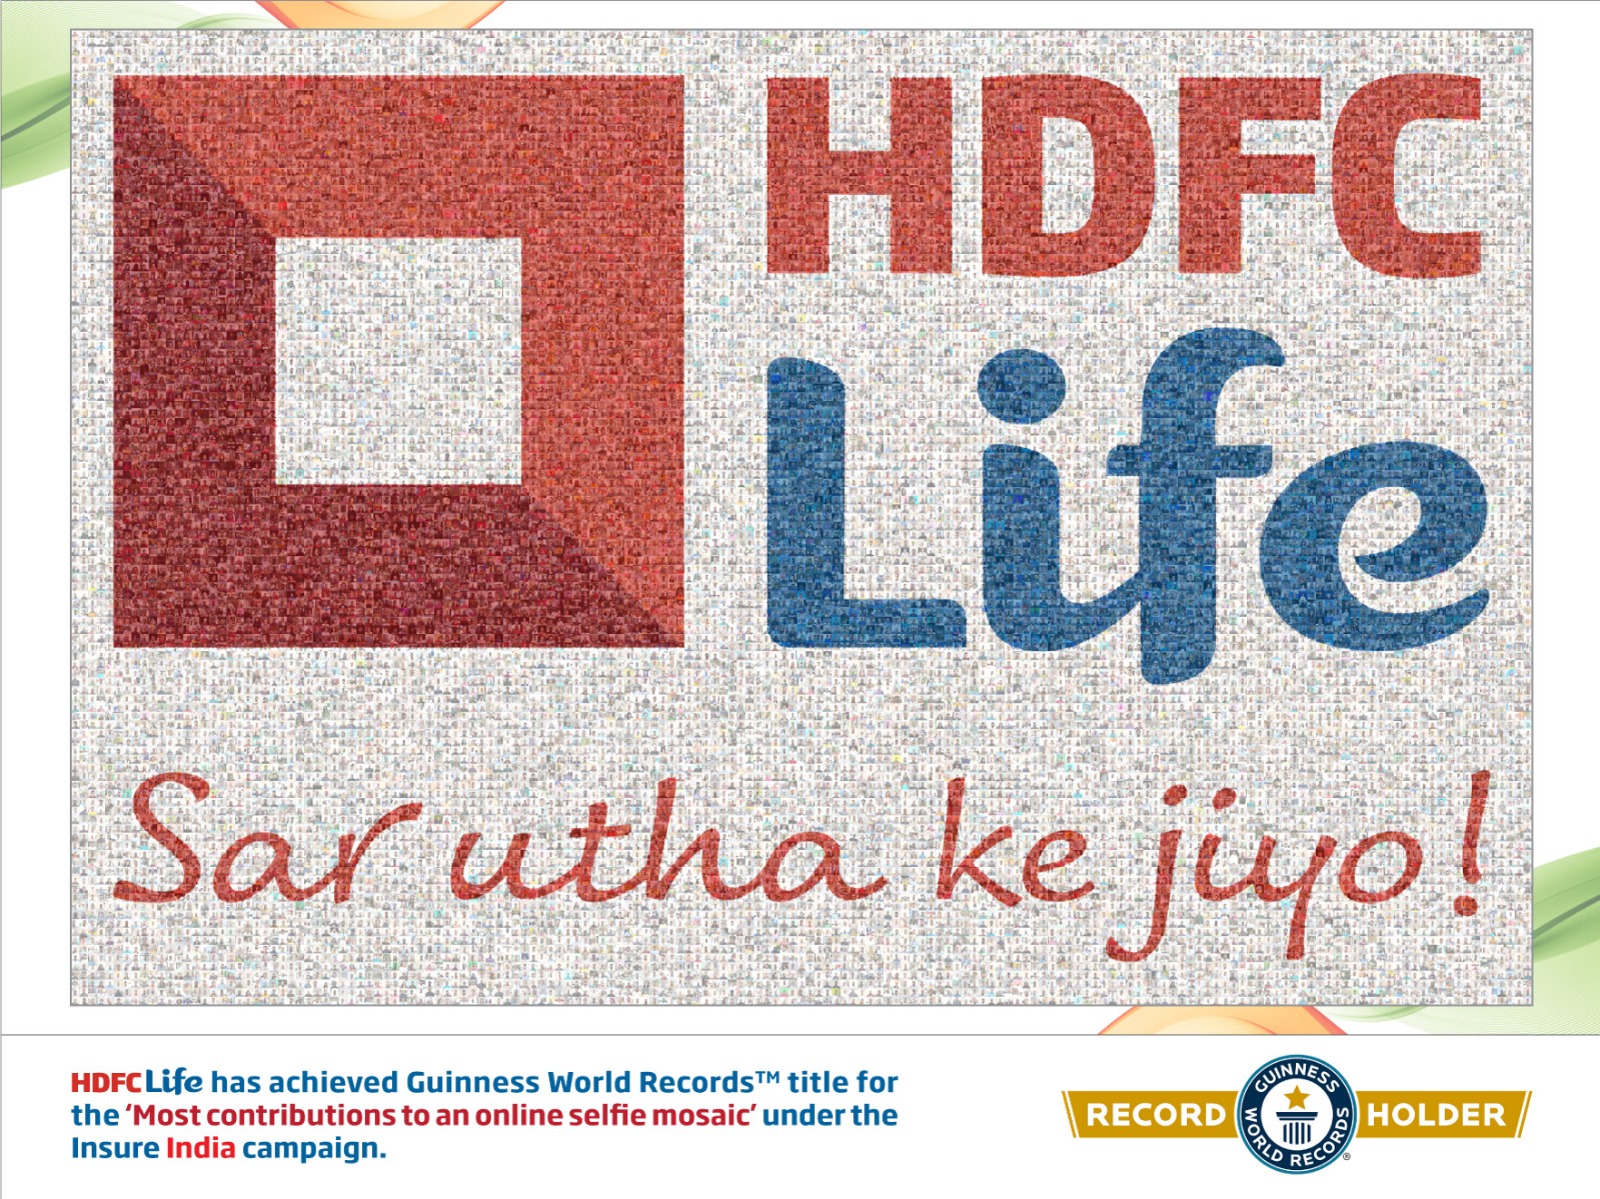 China's central bank acquires over 1% stake in HDFC